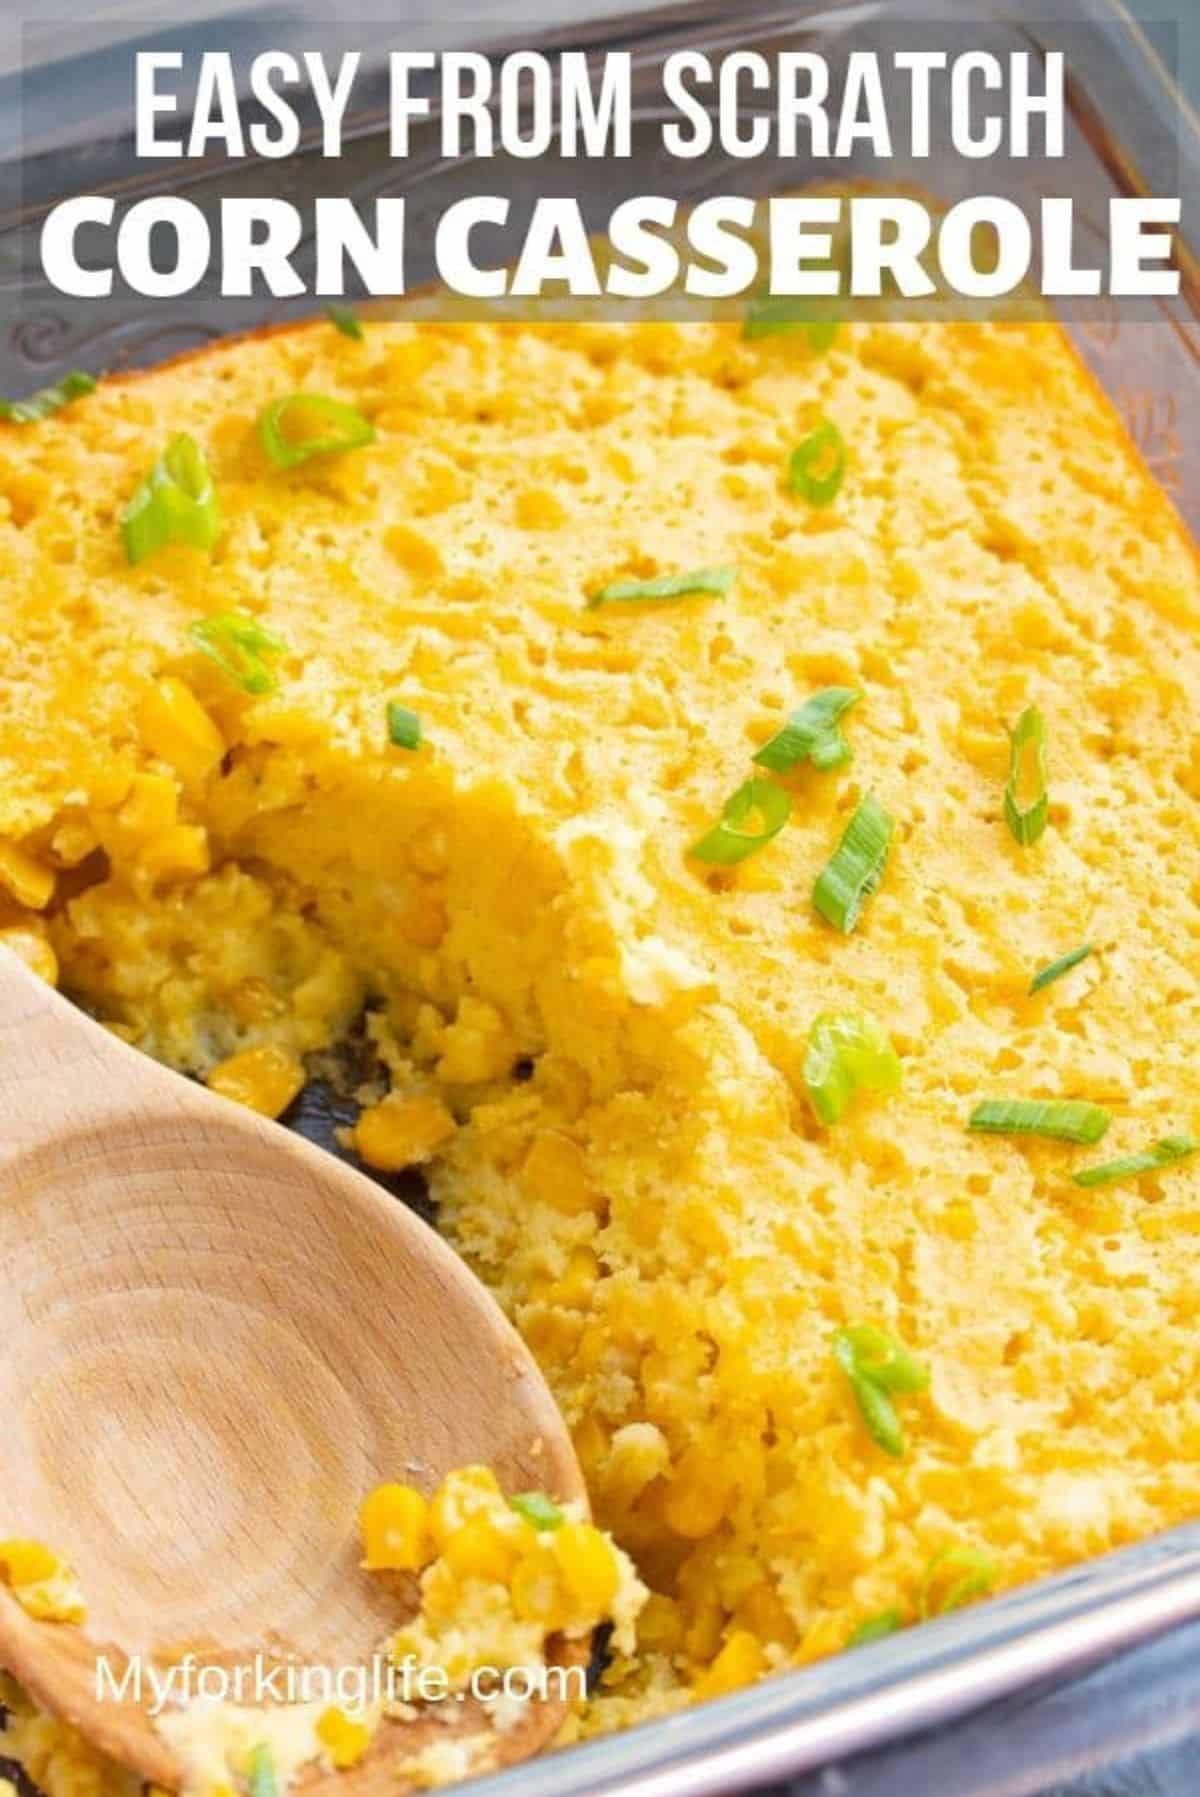 corn souffle image with spoon on side with text that says easy from scratch corn casserole